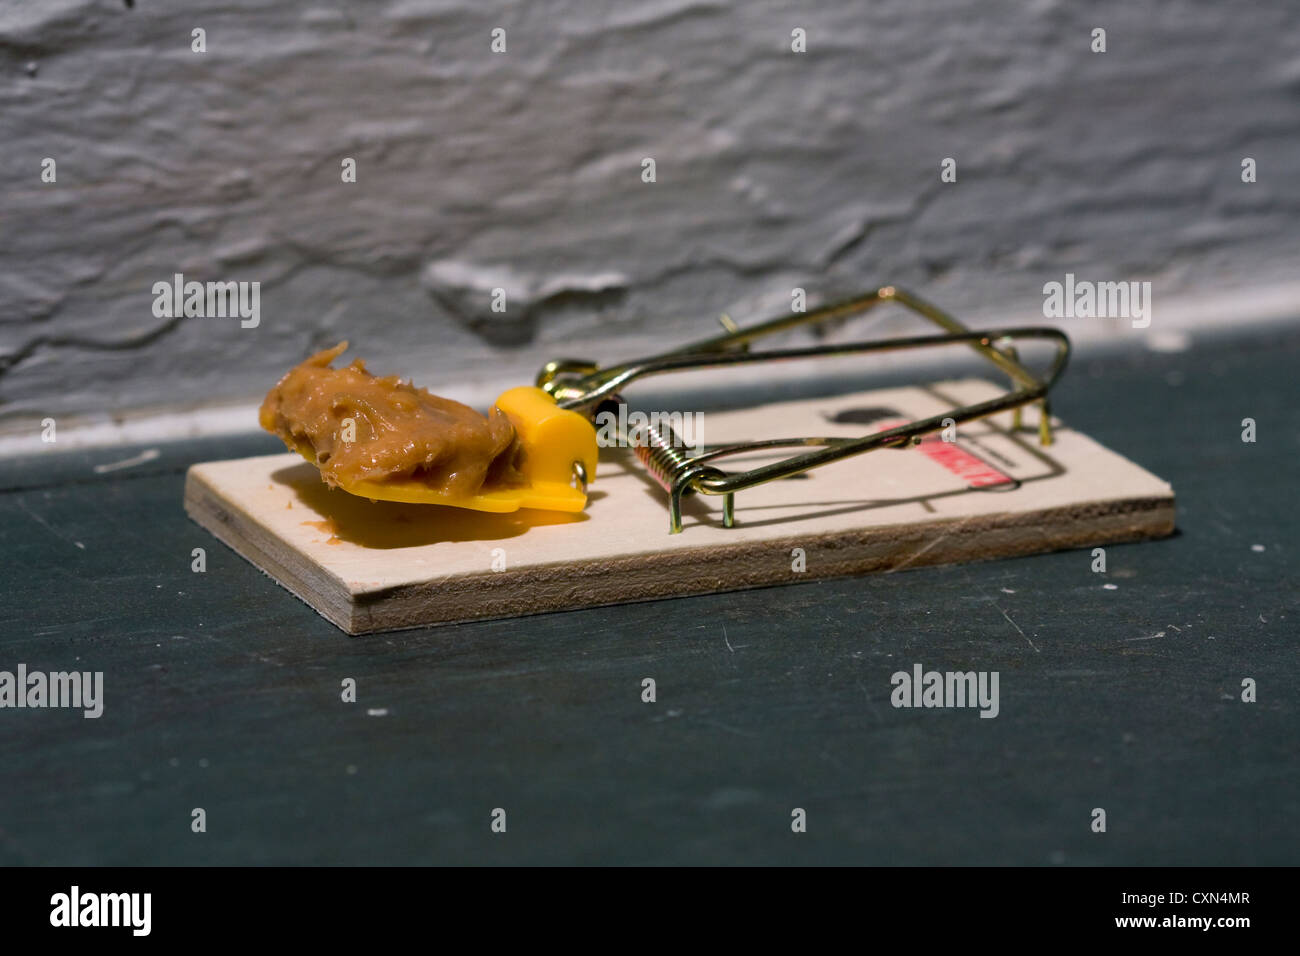 Mouse Trap on floor baited with Peanut Butter Stock Photo